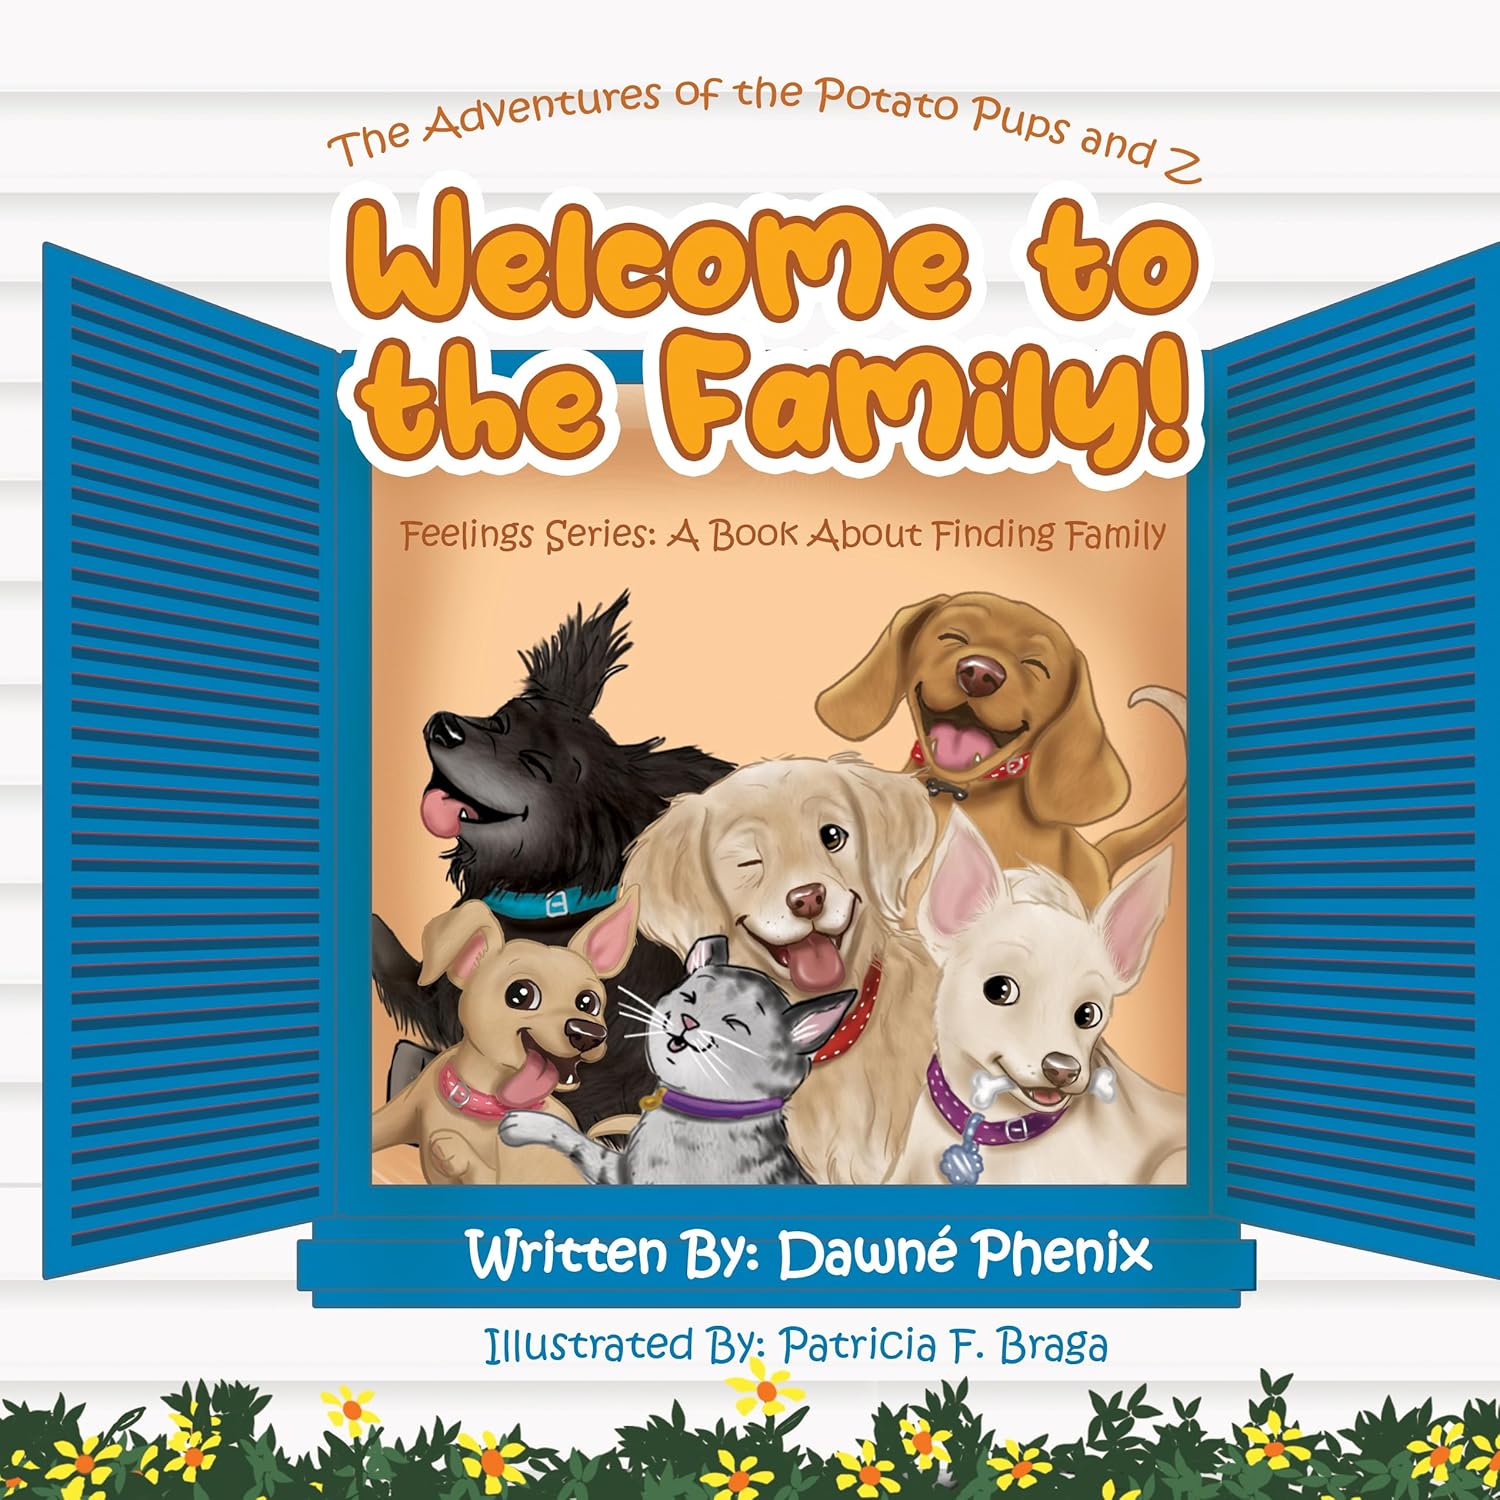 Dawné Phenix Releases New Children’s Picture Book - Welcome to the Family!